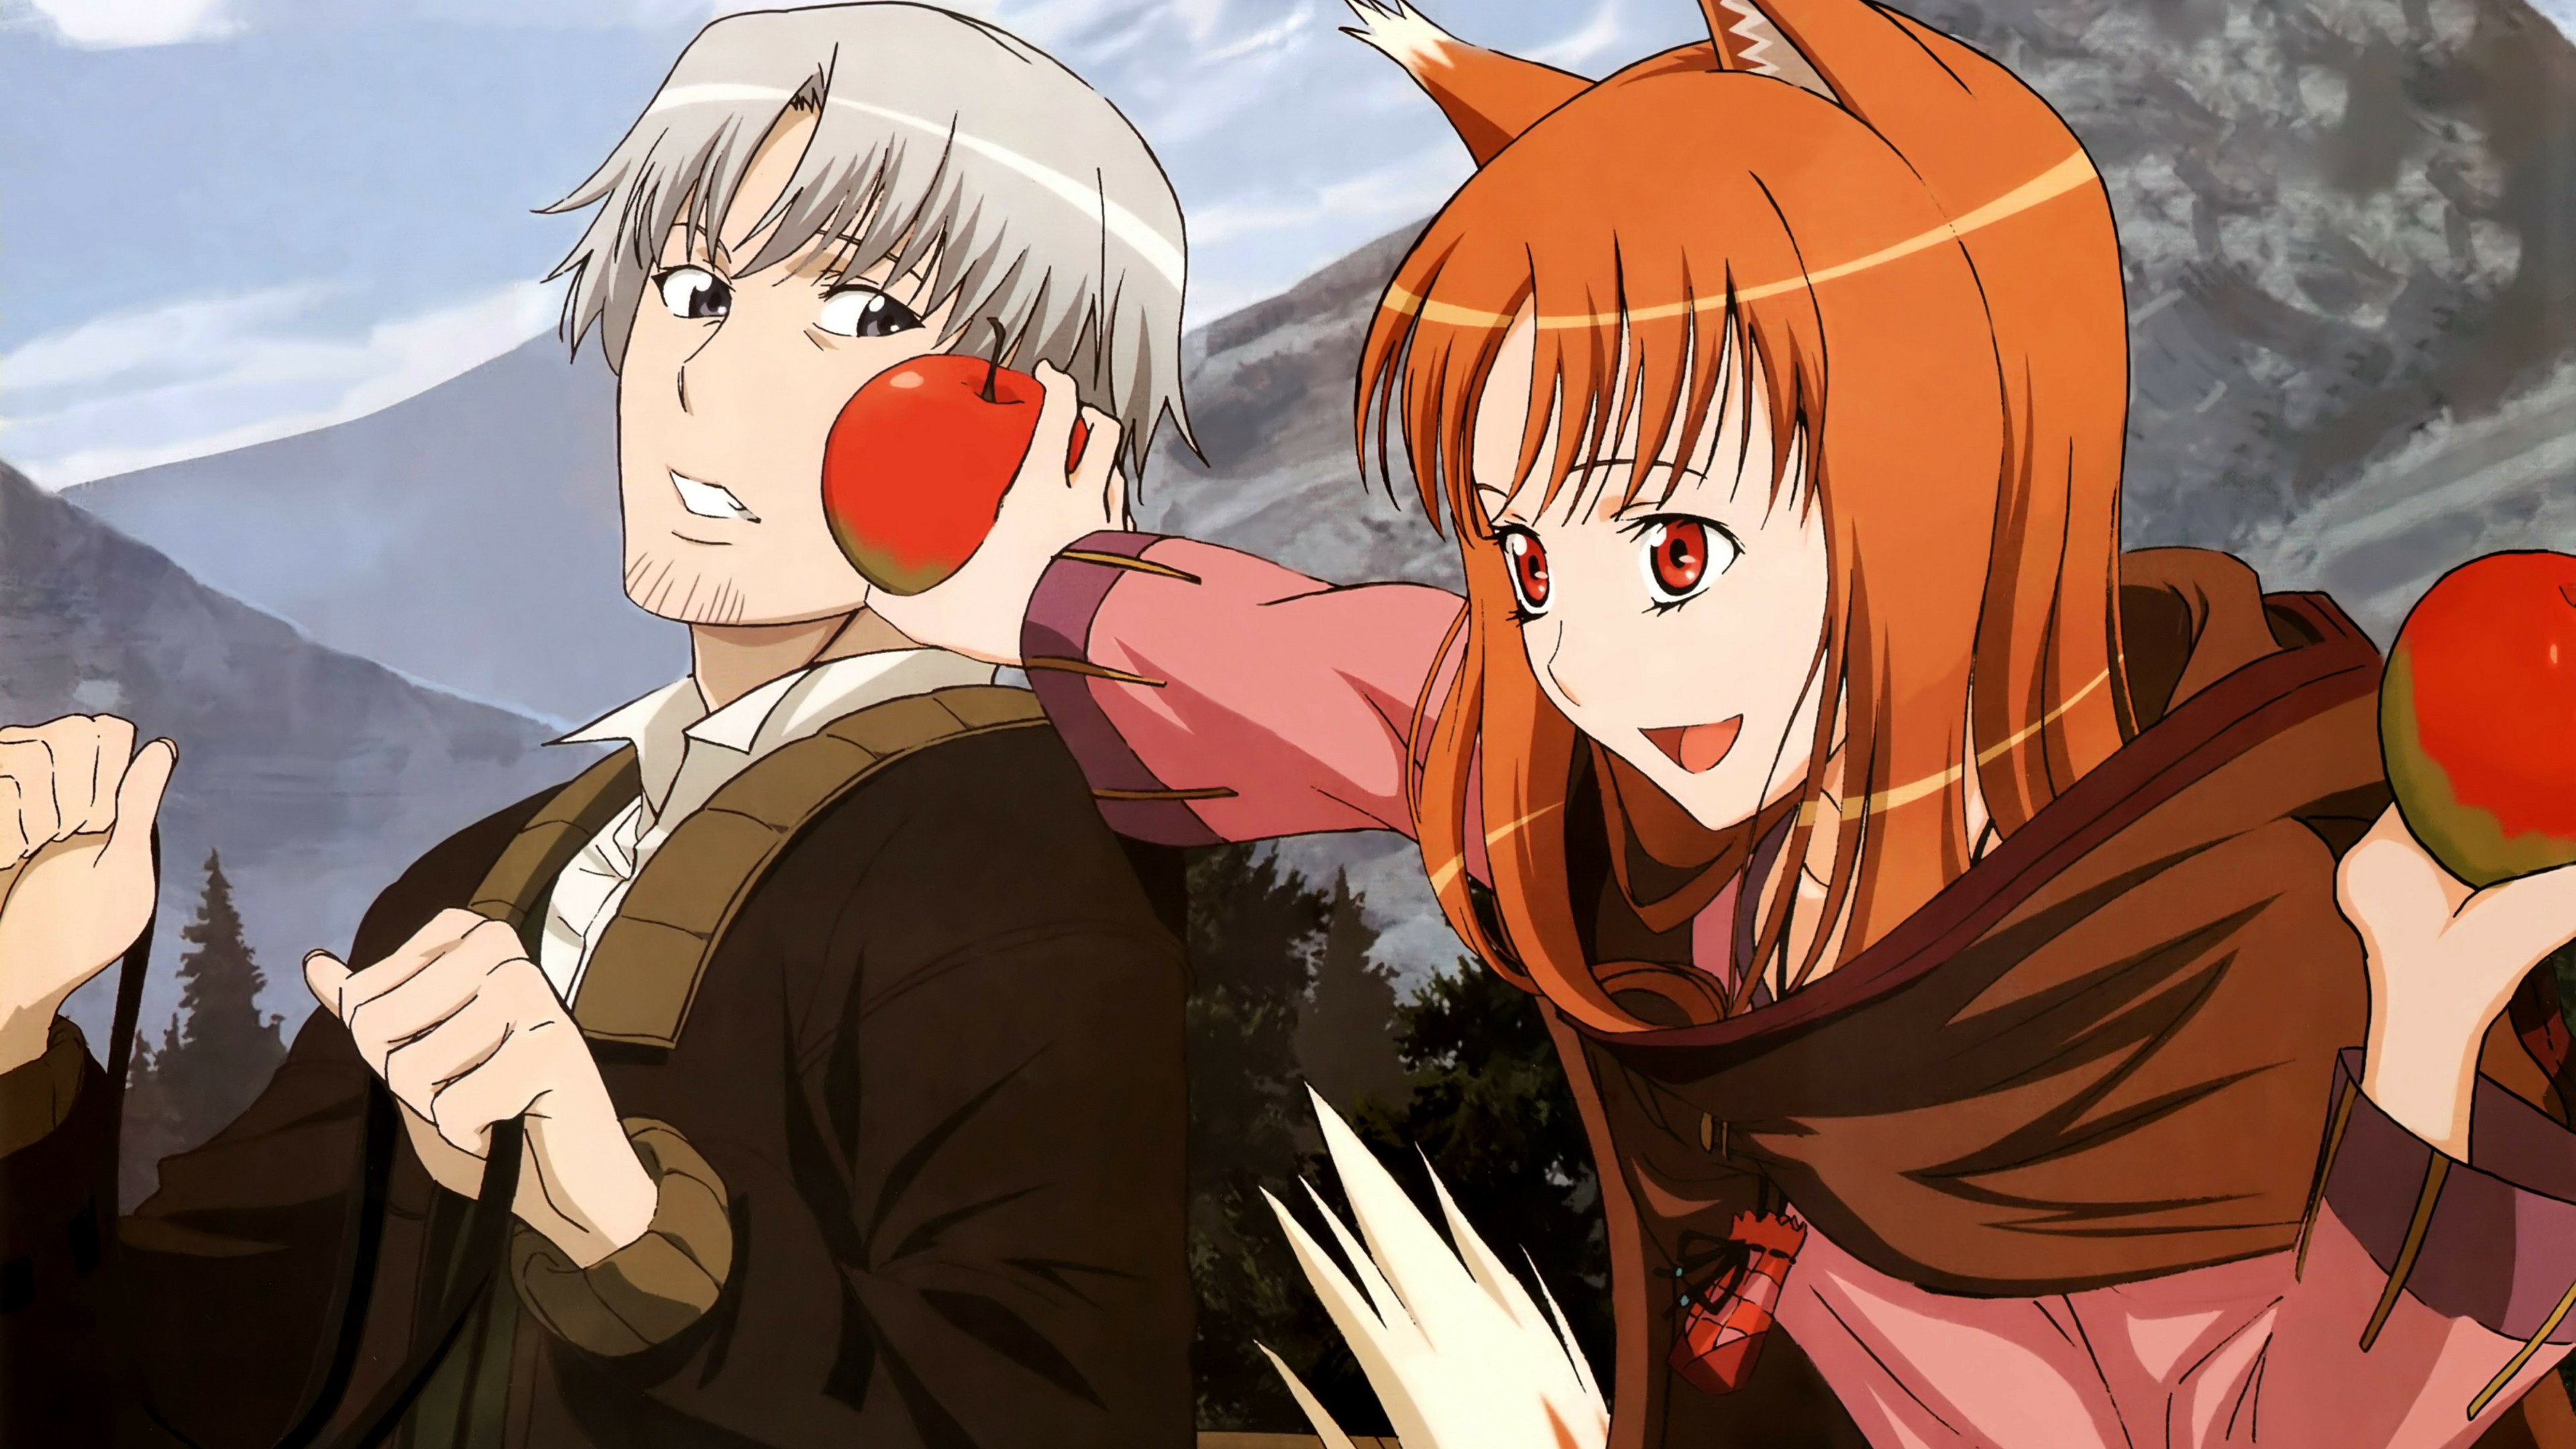 Anime 3840x2160 anime Spice and Wolf Holo (Spice and Wolf) Lawrence Craft apples anime boys anime girls food fruit red eyes open mouth long hair redhead wolf girls